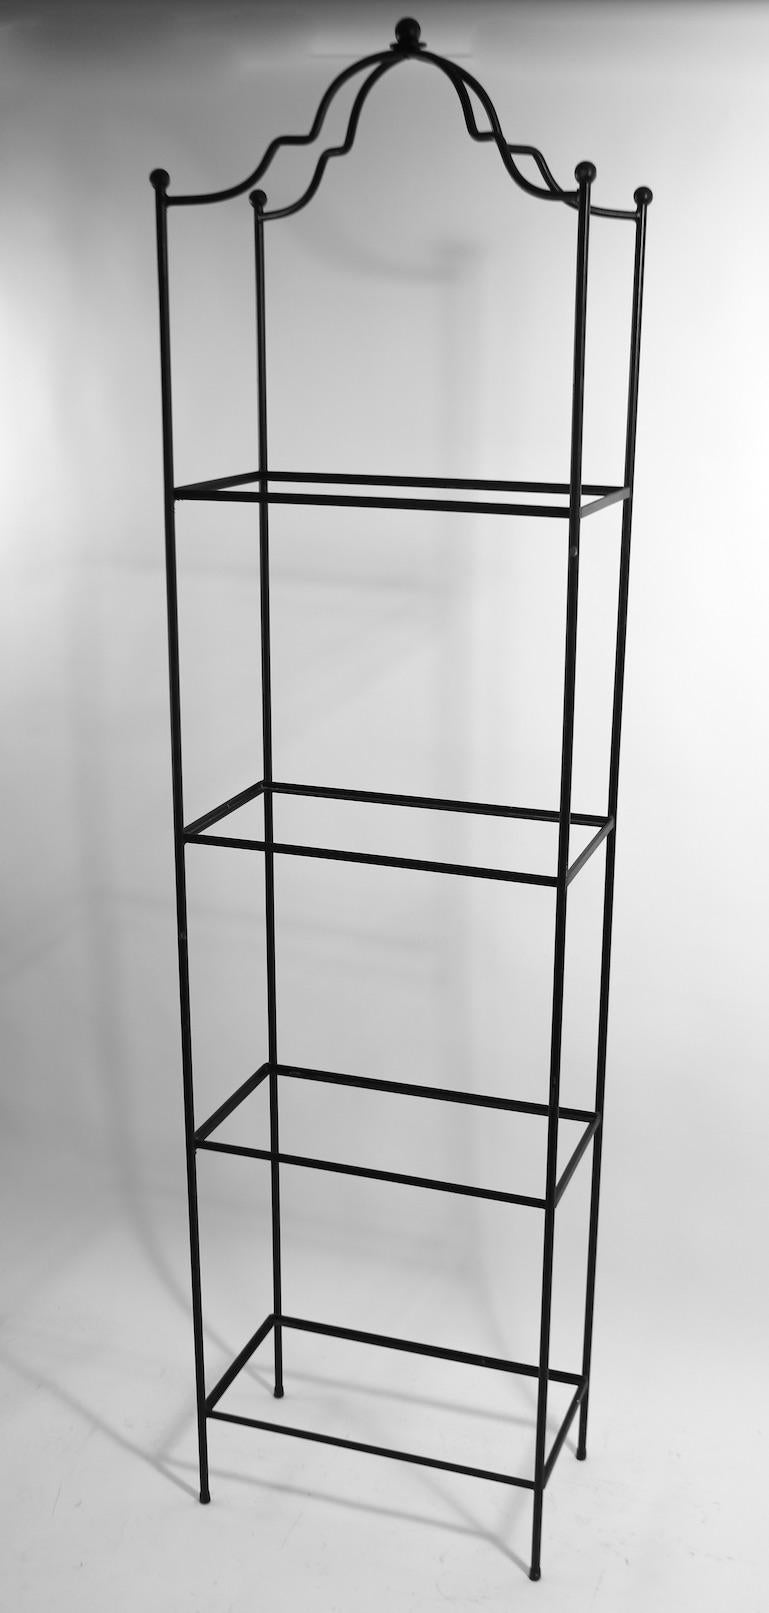 Stylish freestanding shelf of wrought iron and textured glass. This chic architectural étagère features four rectangular shelves, heights as follows L to H 6, 23, 40, 57. Perfect for display or use in a kitchen or bathroom, or possibly in a